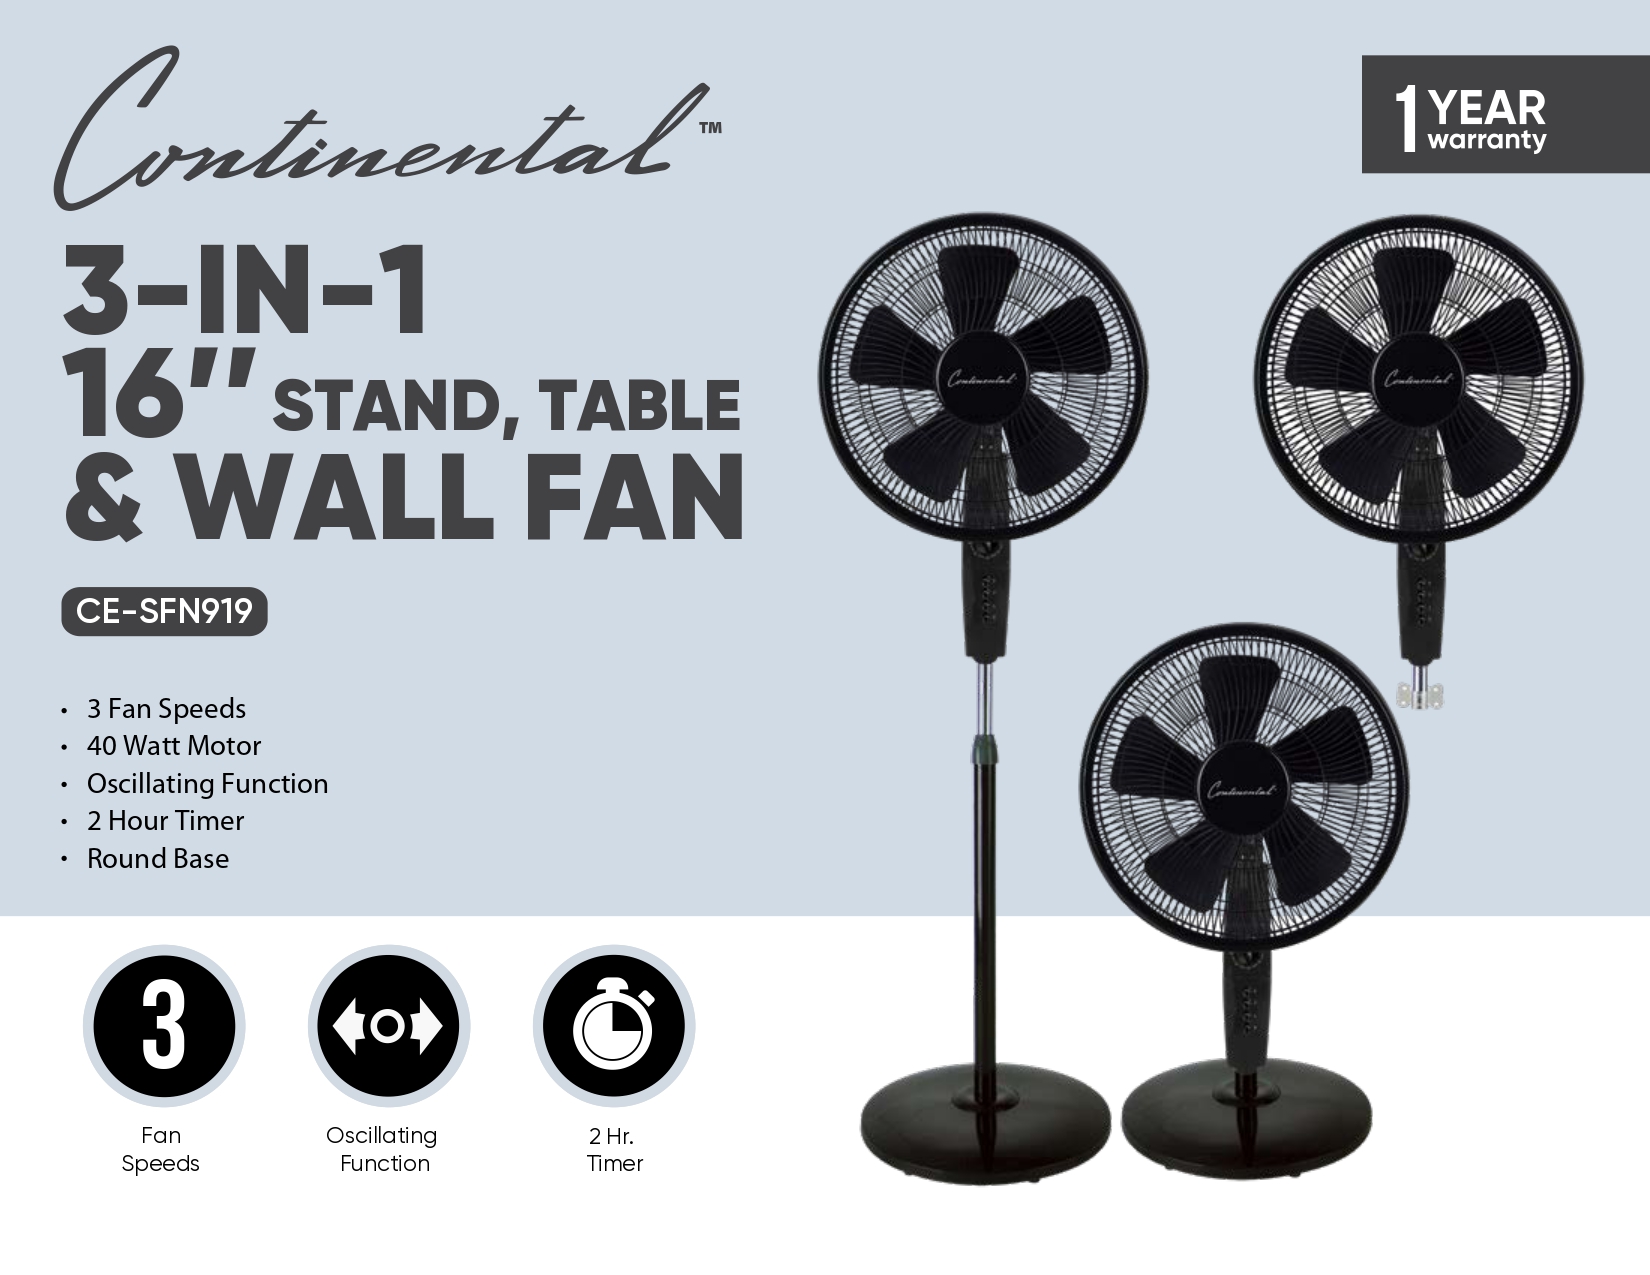 3-IN-1 16" STAND, TABLE & WALL FAN